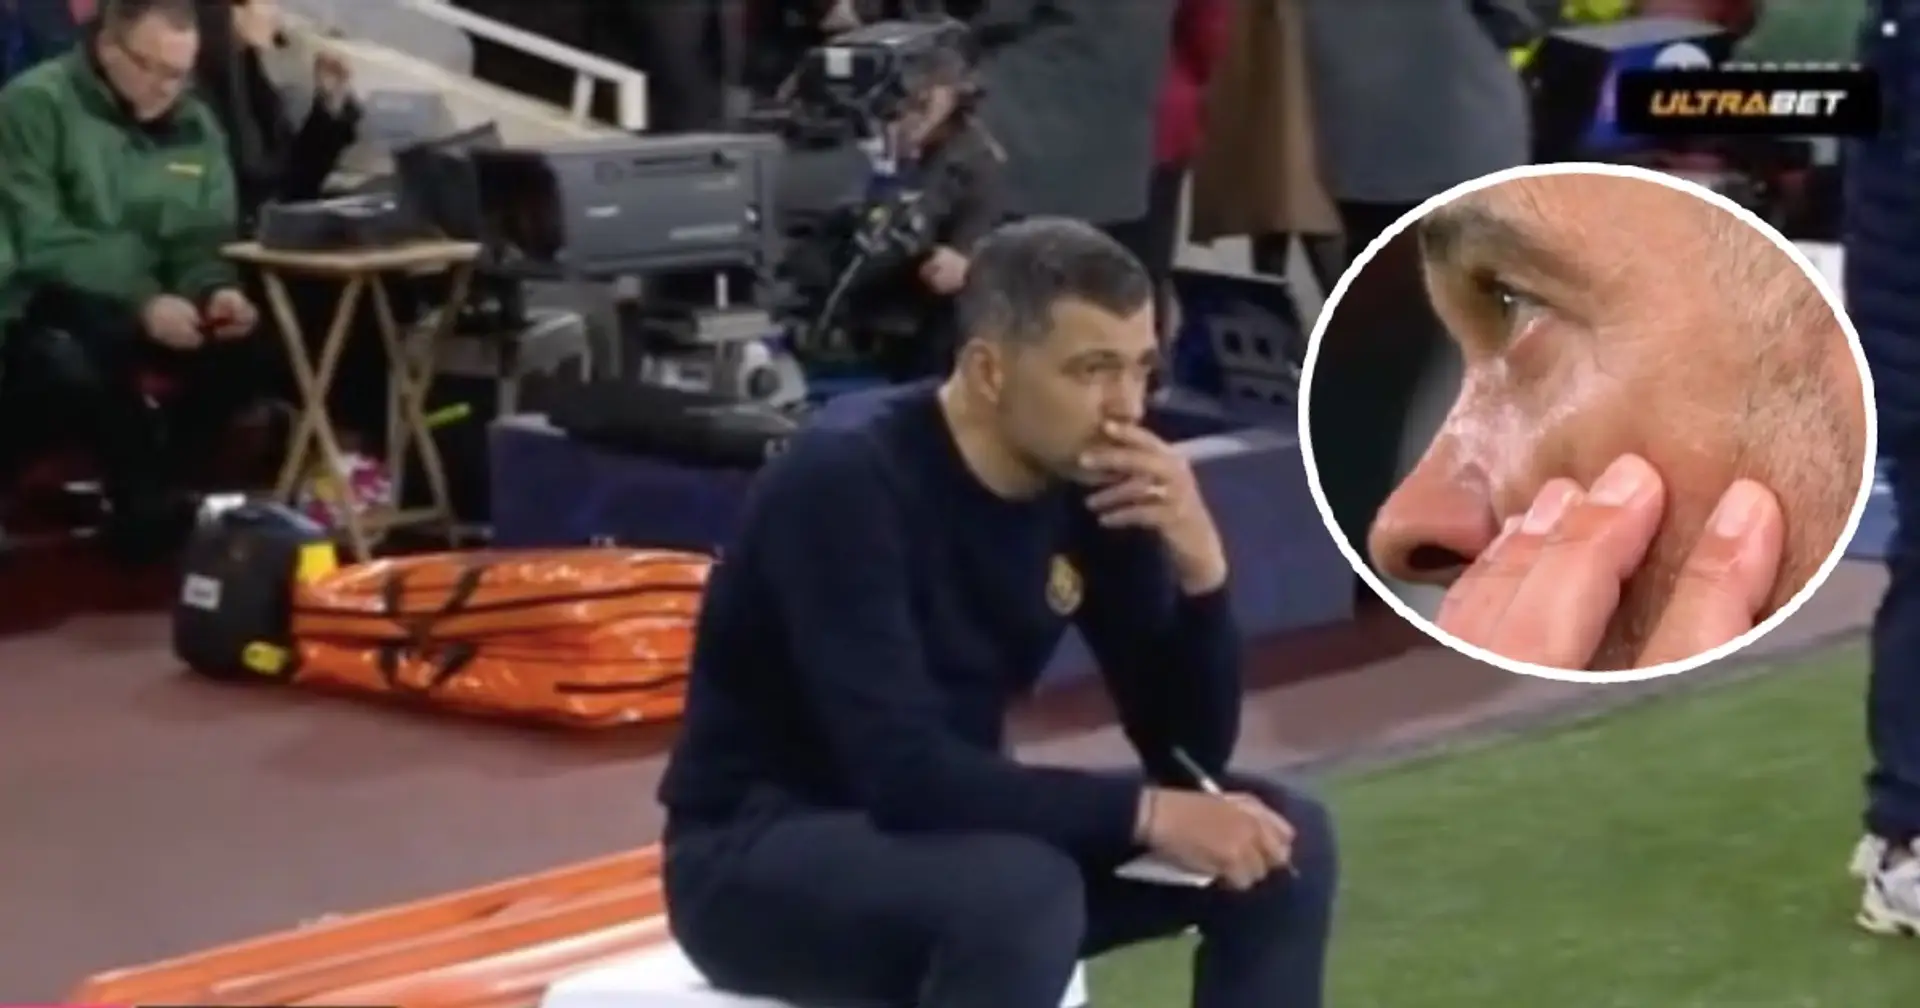 Porto coach lost in thought after Champions League exit - spotted 